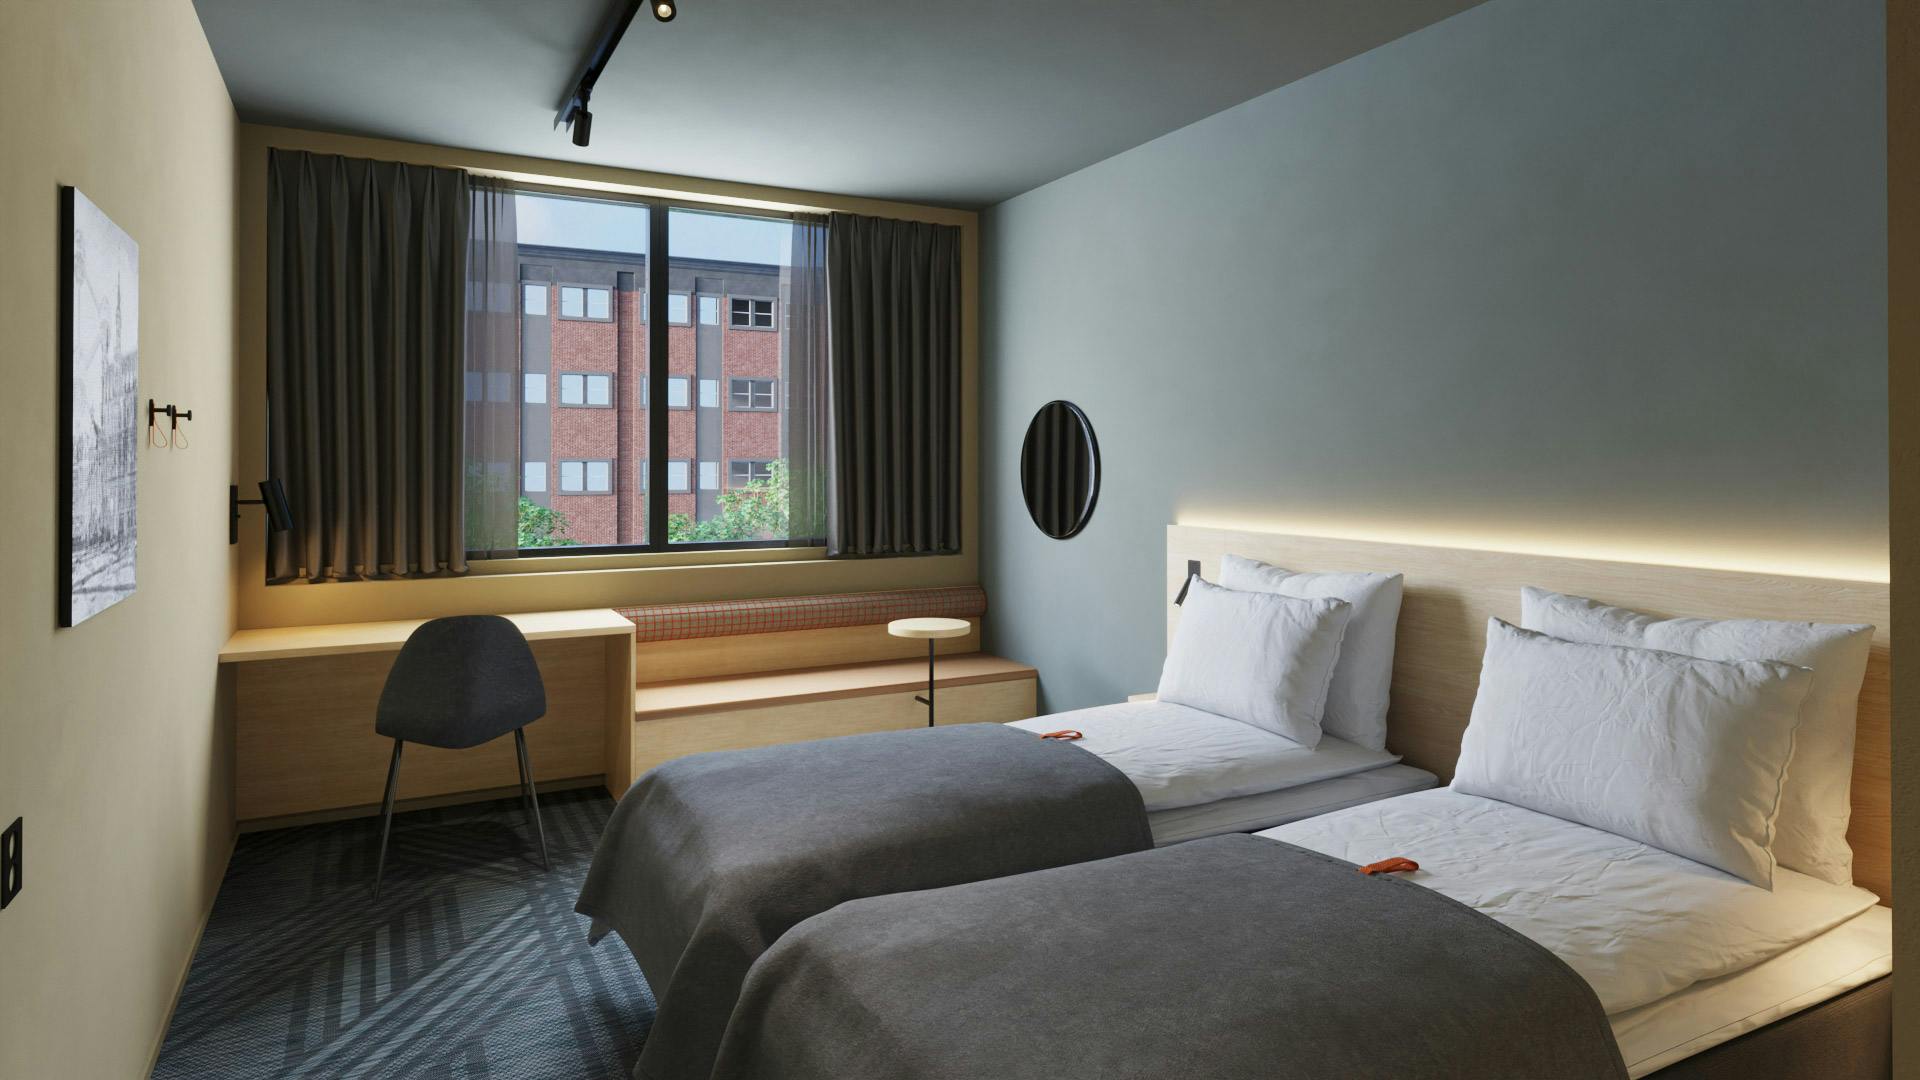 Twin room in Cirybox Brussels. Two single beds, seating area with window.